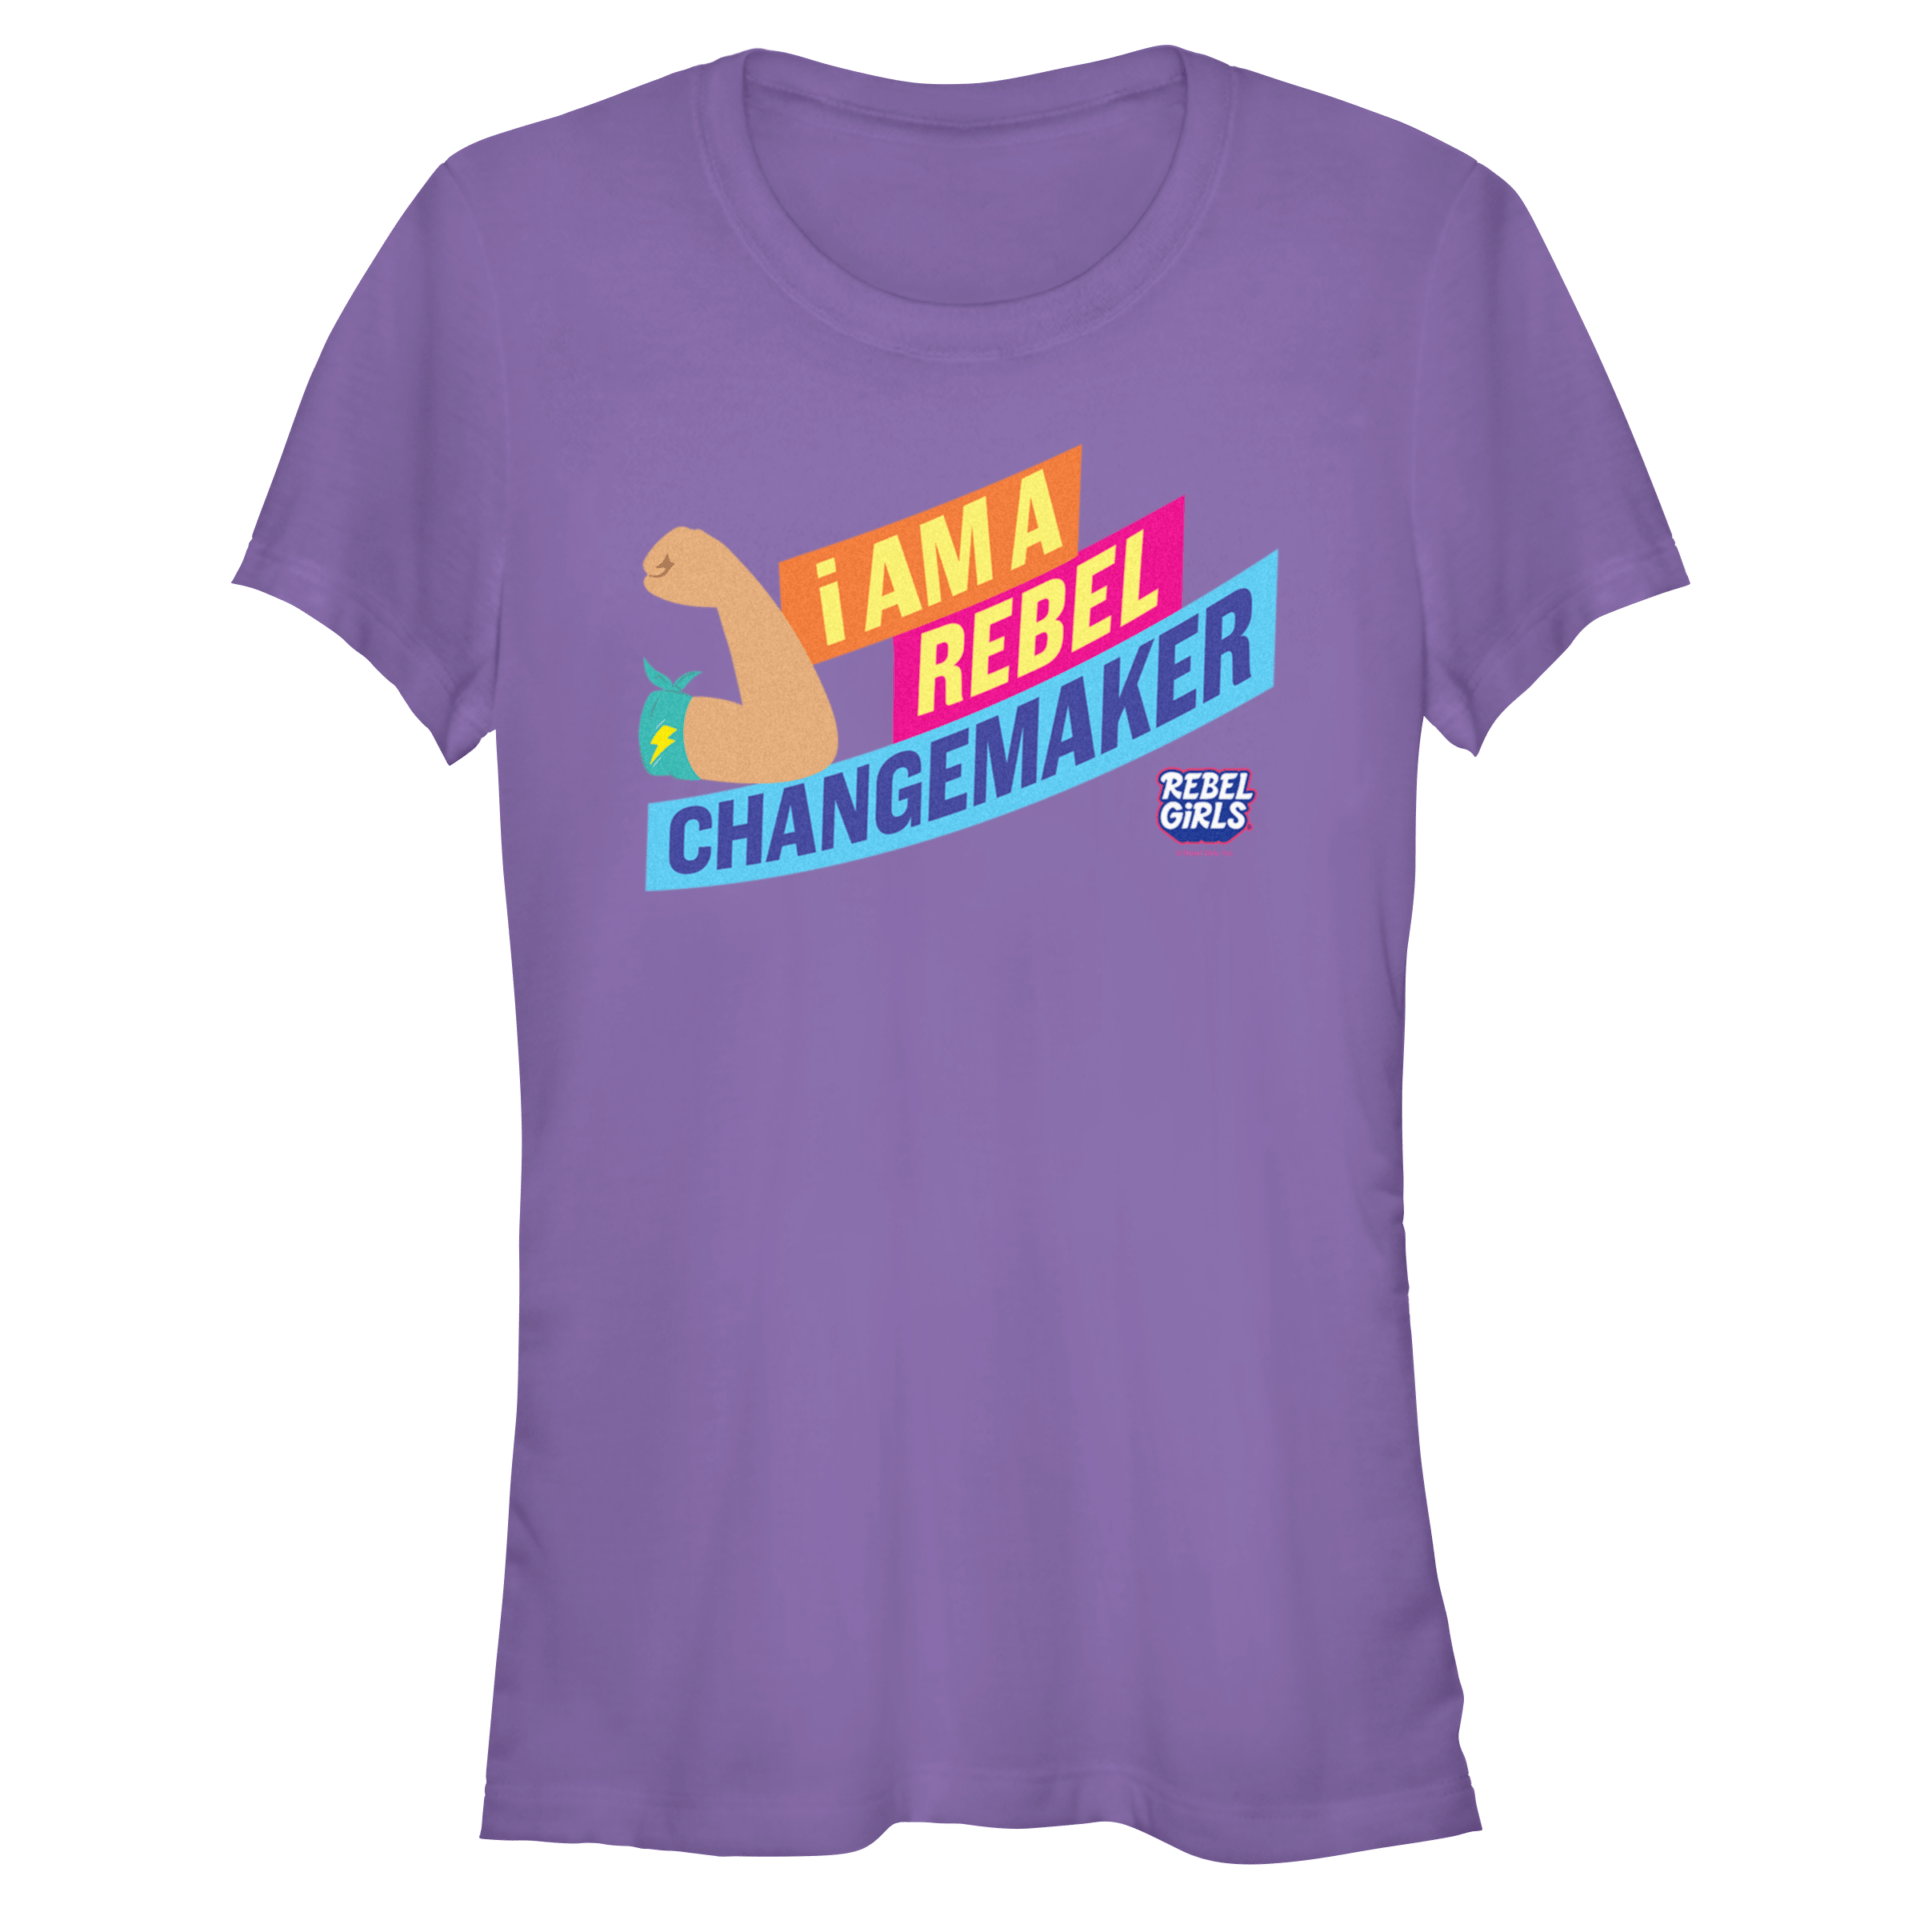 “I am a Rebel Changemaker” Tees and Tops